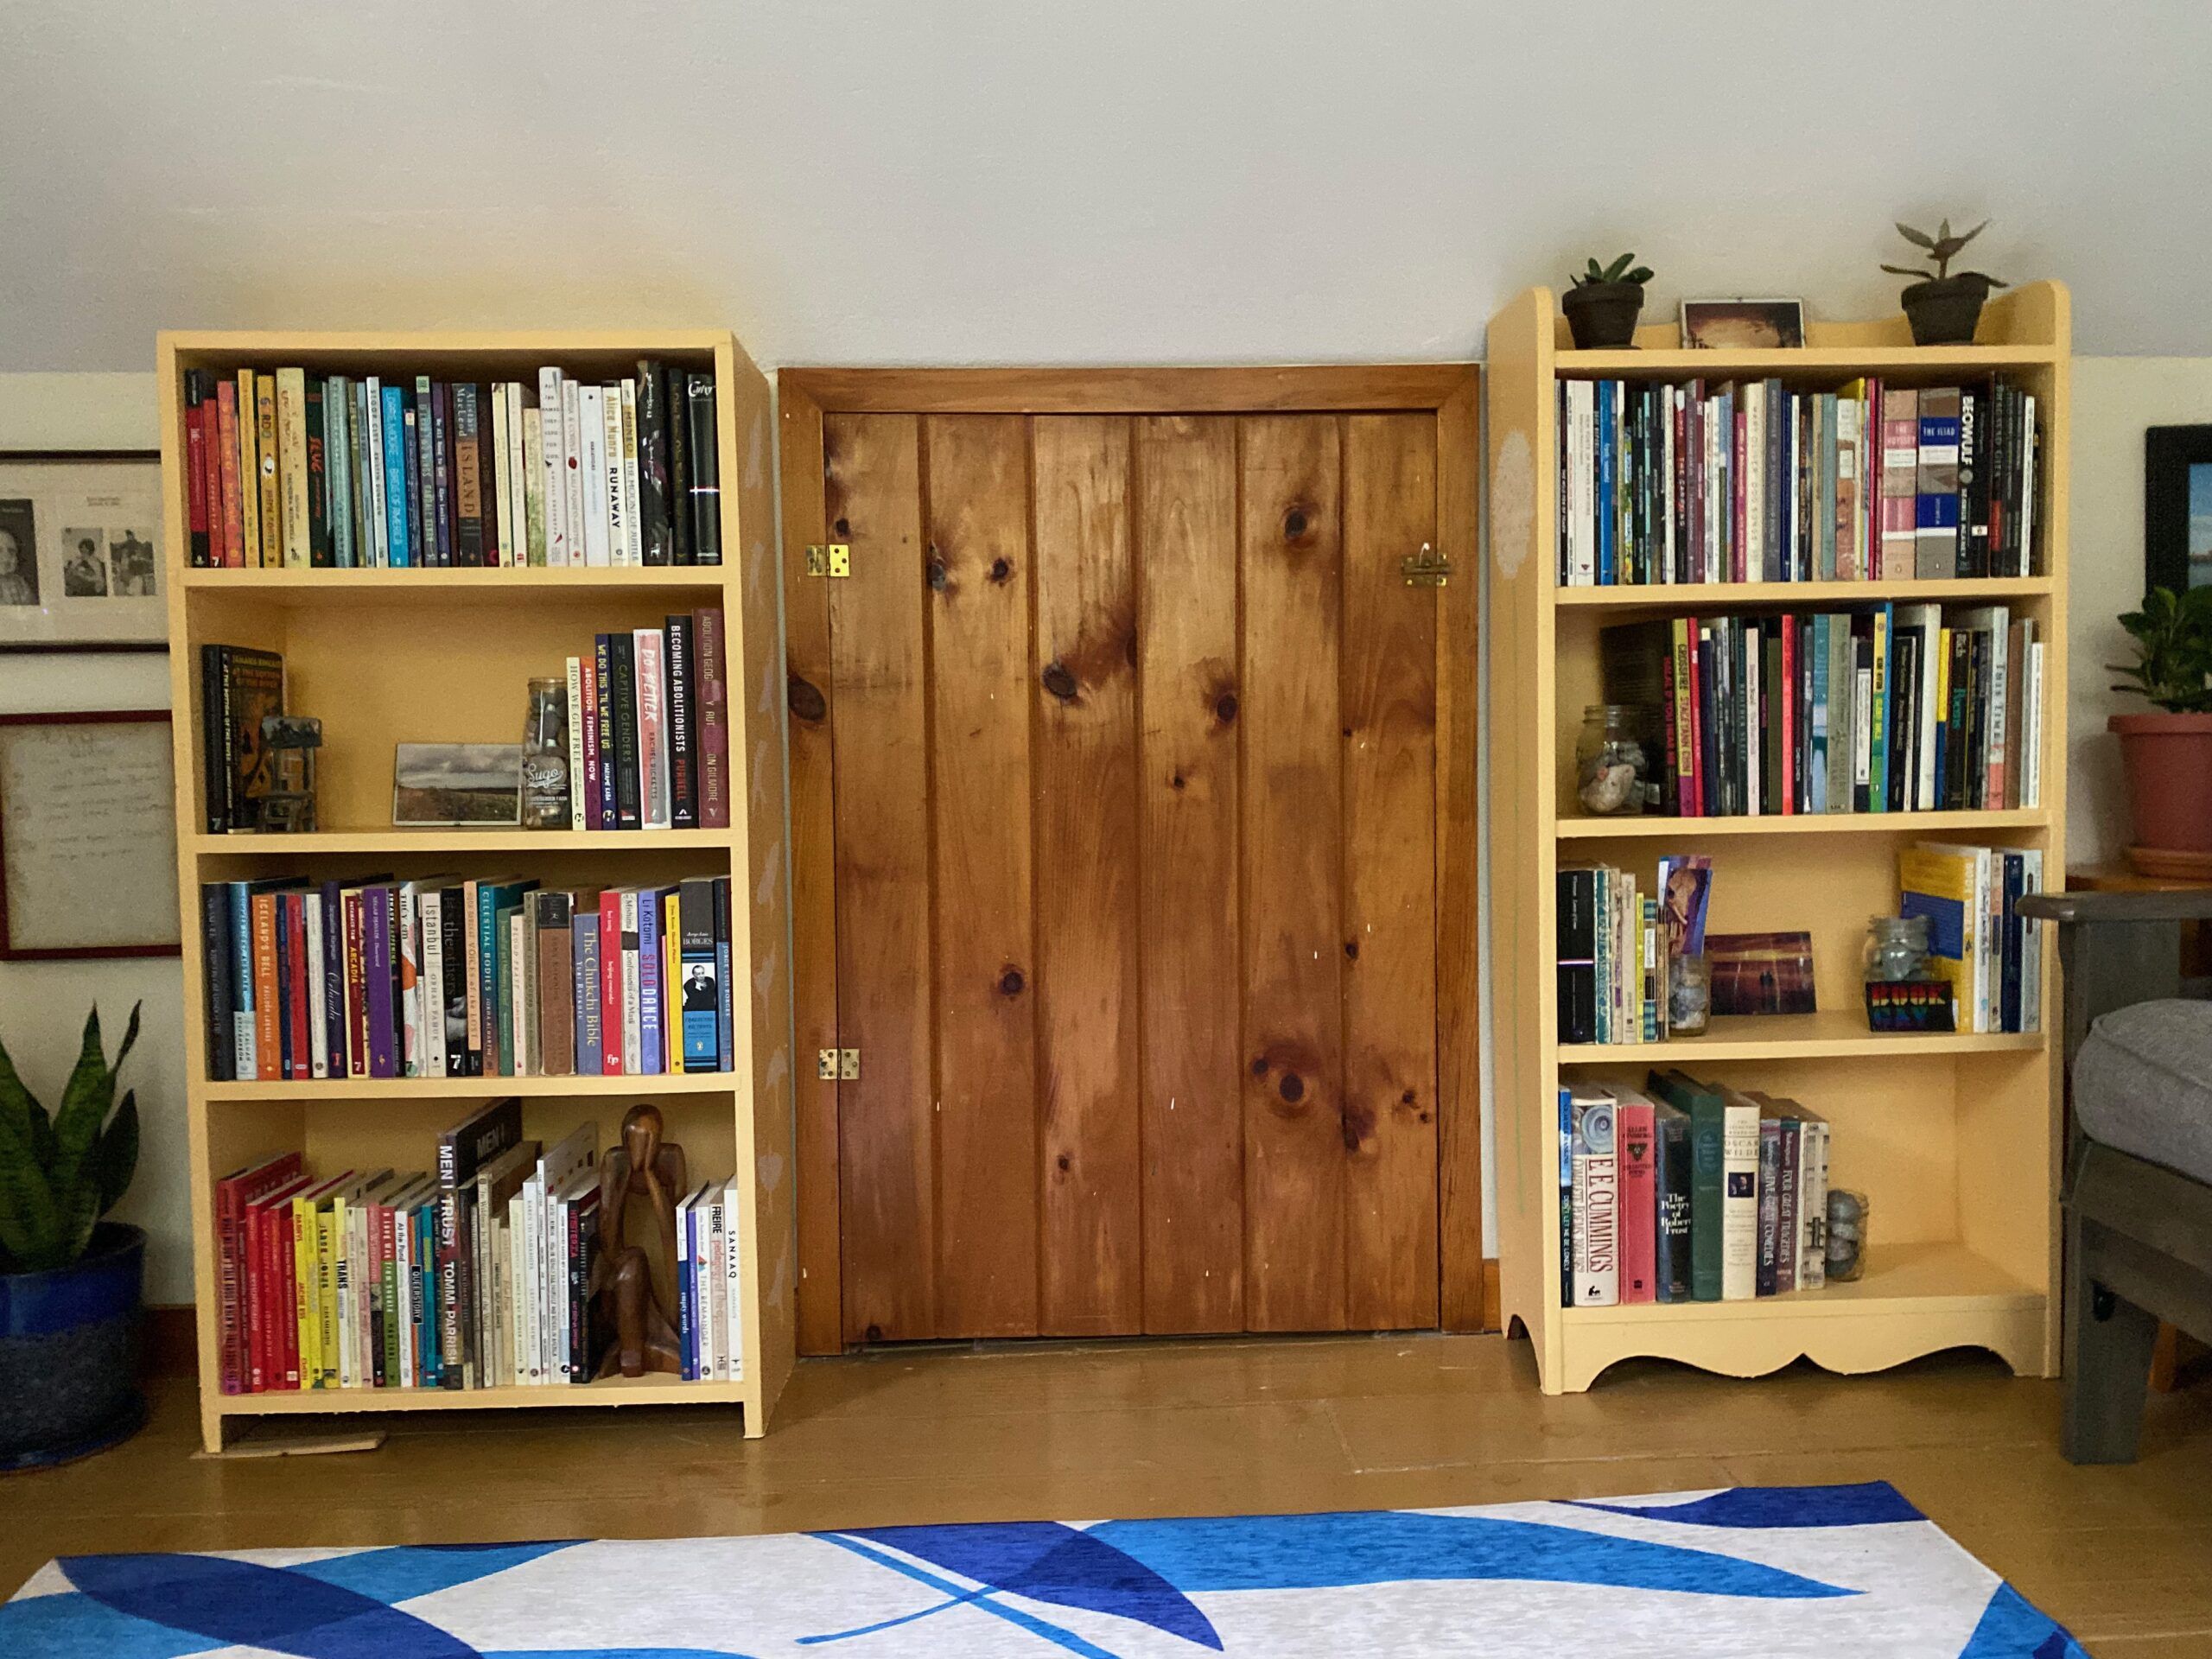 Two yellow bookshelves, full of books, plants, and small knickknacks, on either side of a wooden closet door.